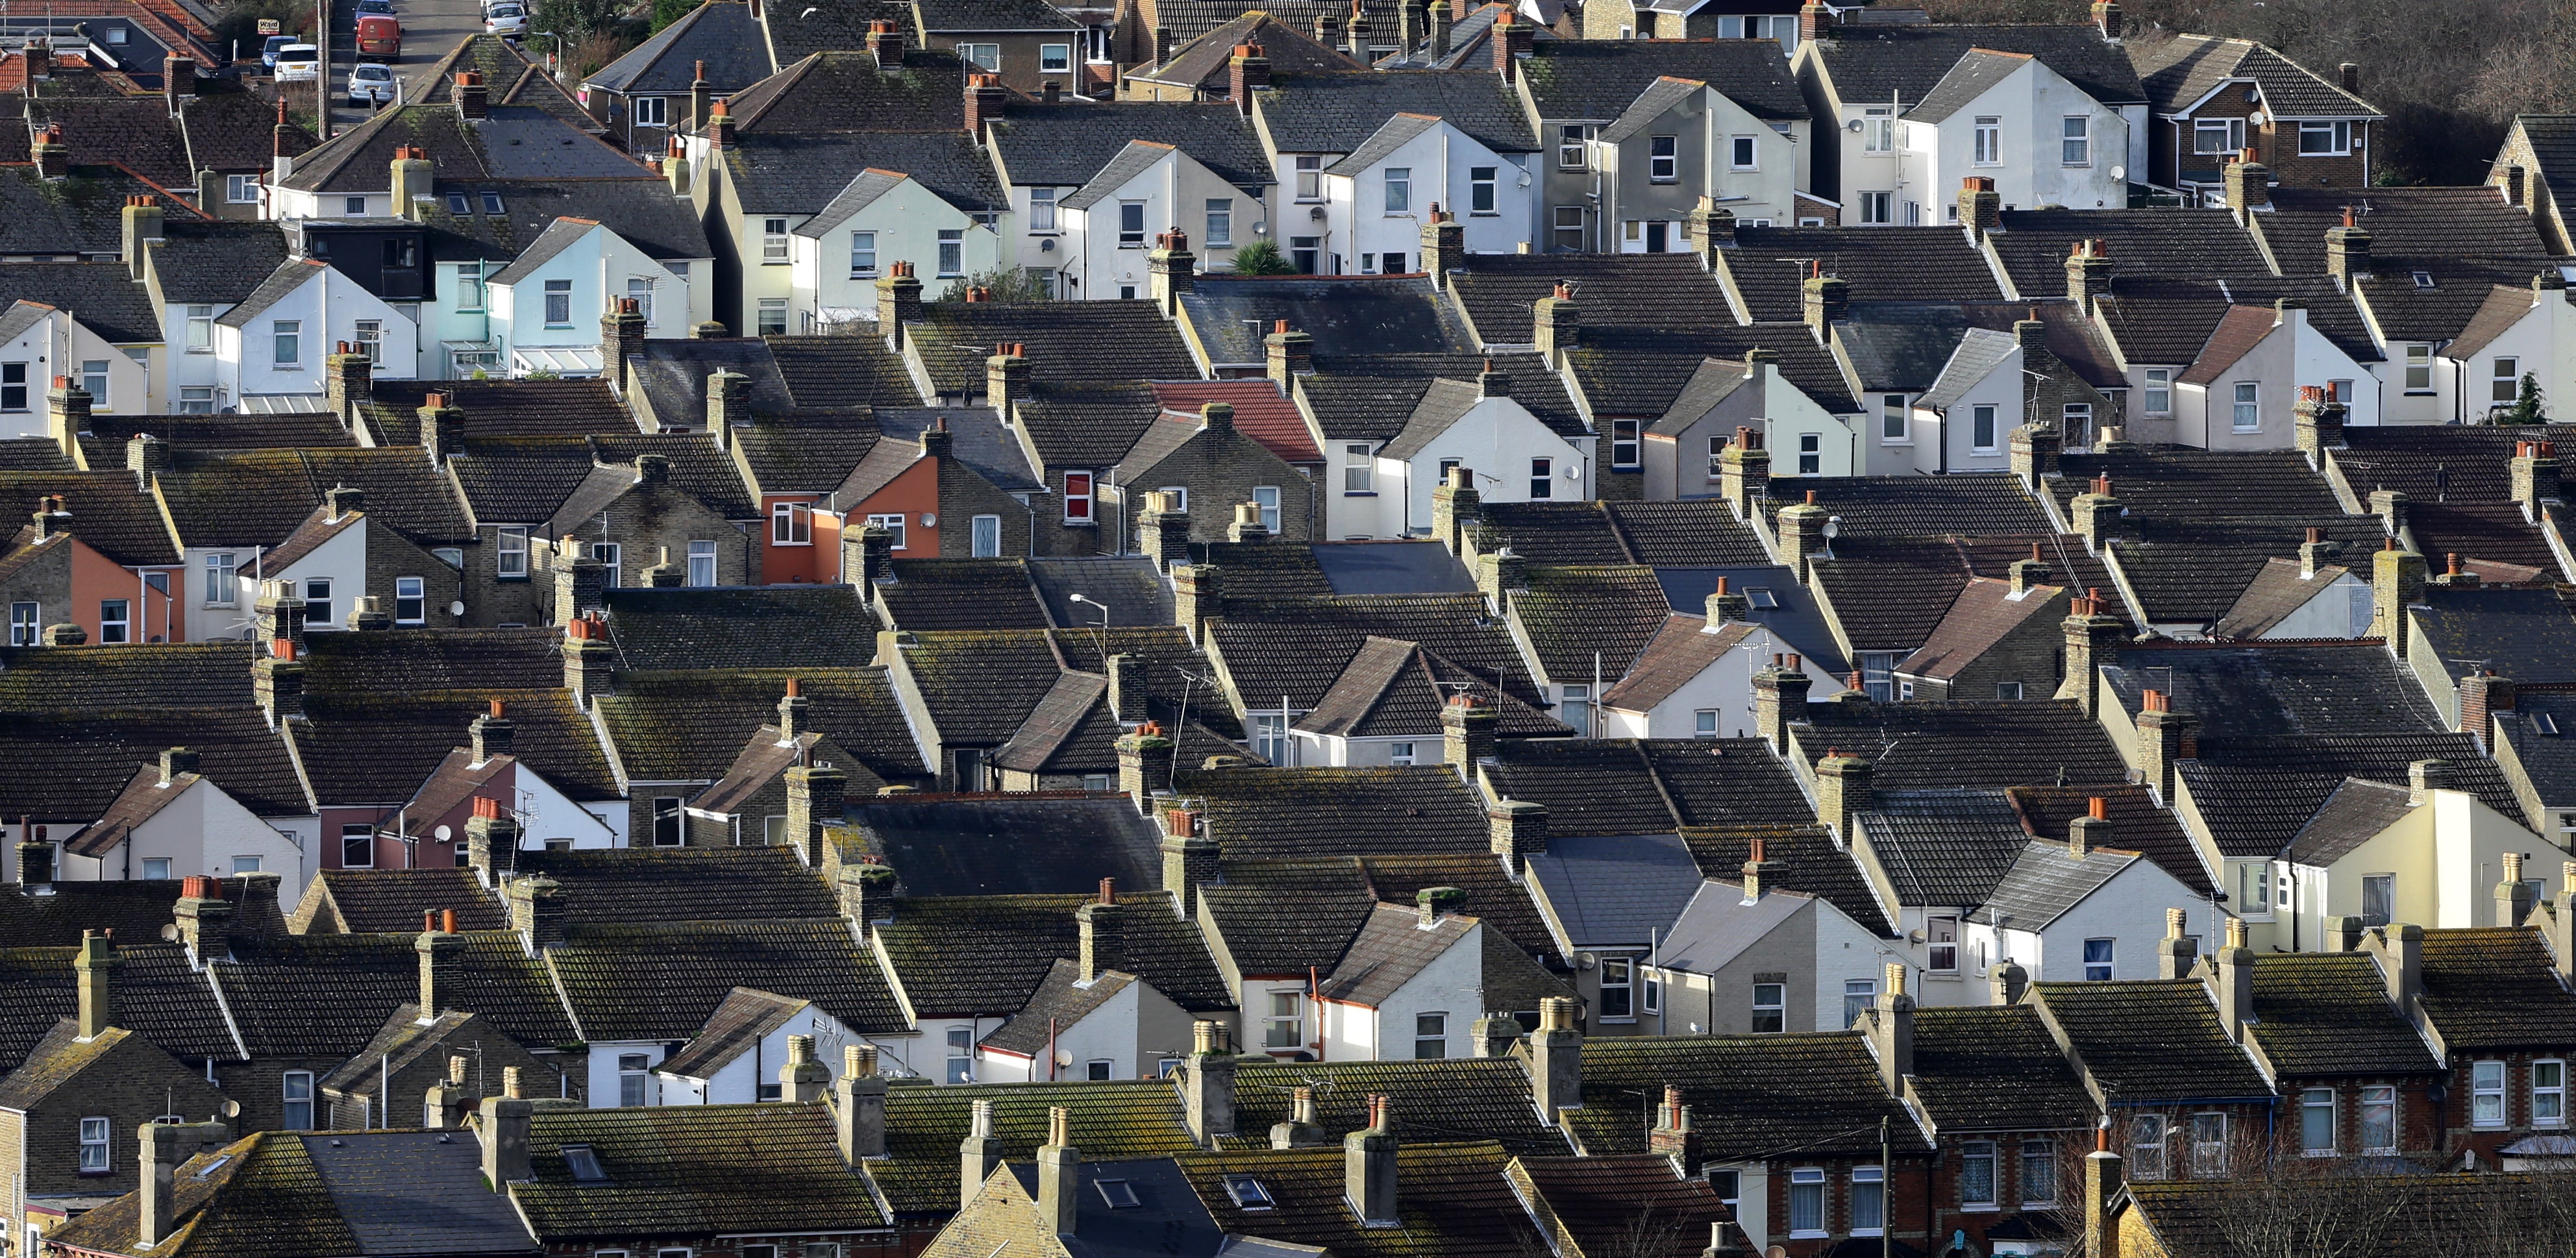 The relationship between house prices and incomes has soared and is now the highest it has been in the UK for more than a century